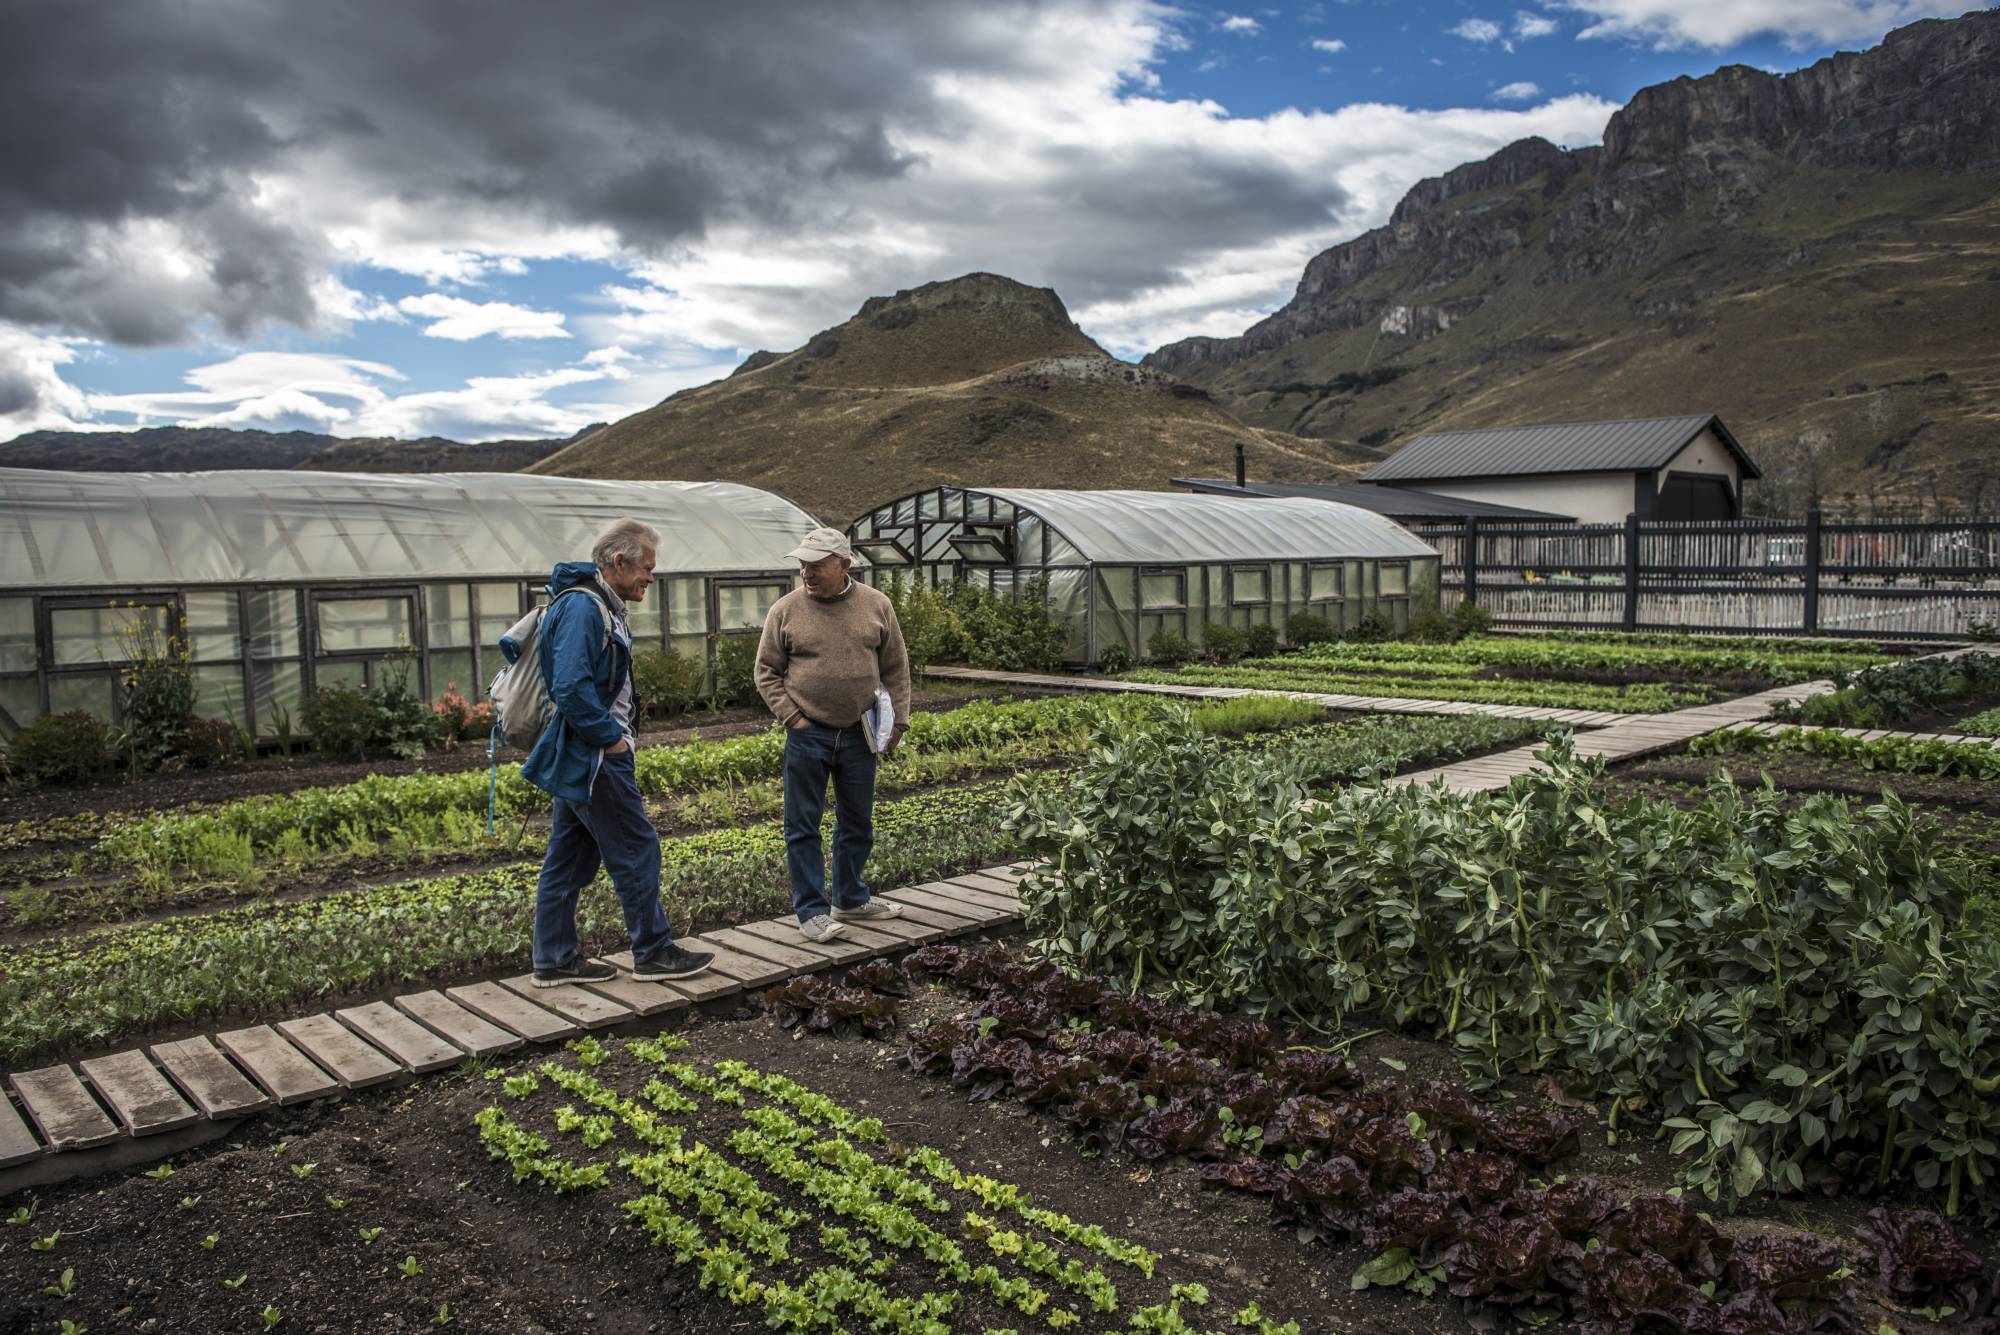 Chouinard (center) at organic gardens that supply a restaurant in Patagonia National Park, Chile, in January 2018. | MERIDITH KOHUT / THE NEW YORK TIMES